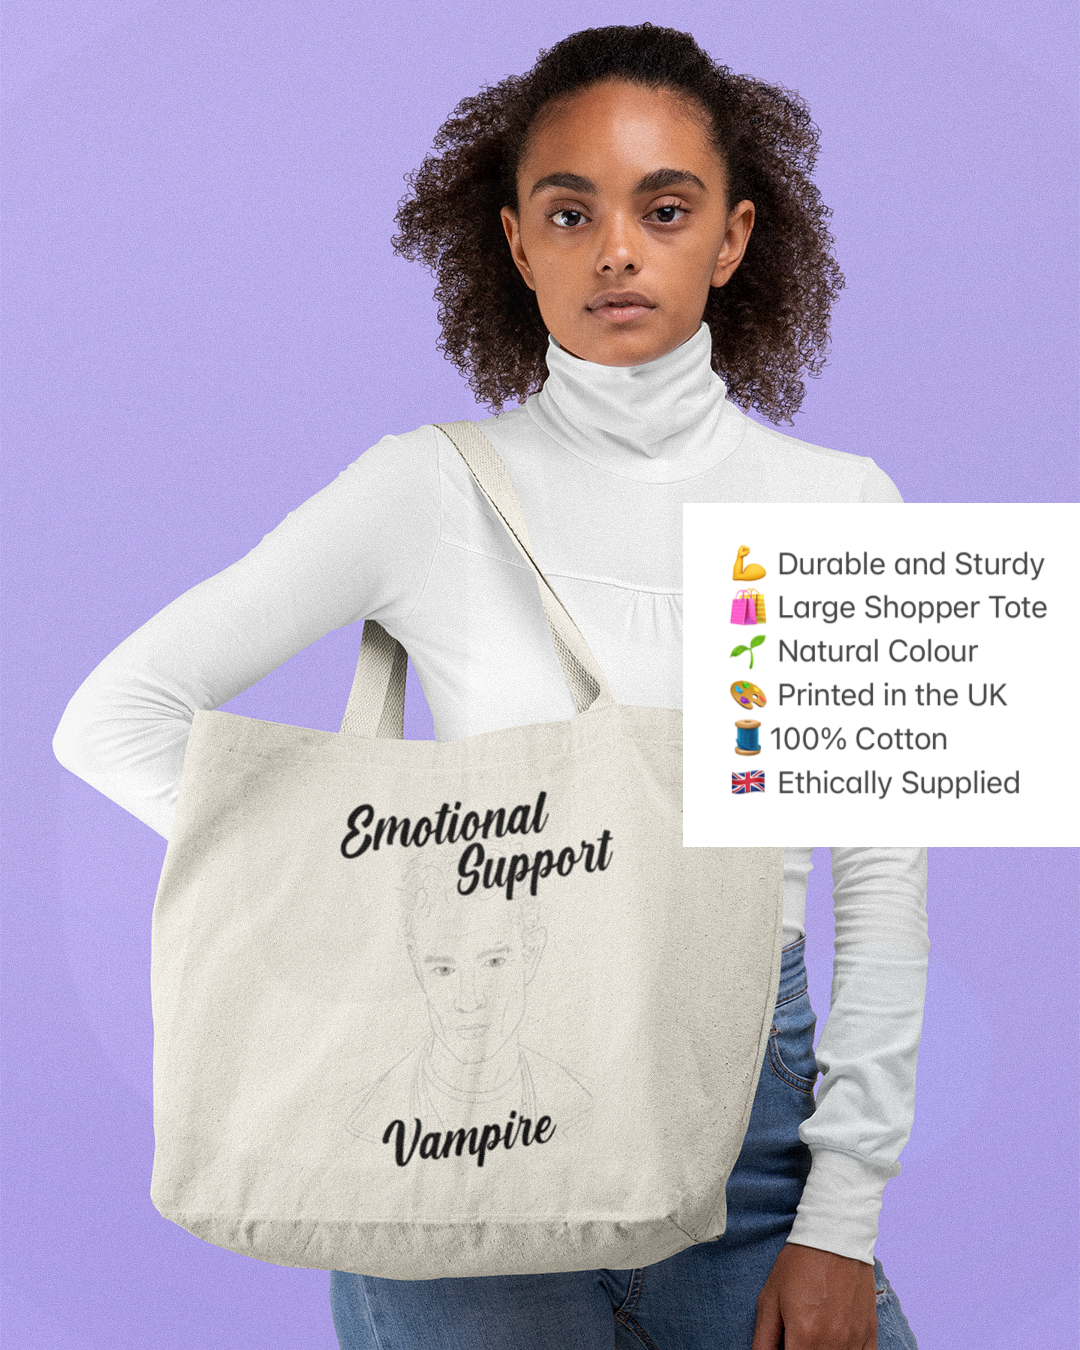 Spike Is My Emotional Support Vampire Buff Inspired Tote Bag - Spike Is My Emotional Support Vampire Tote Bag - Buffy The Vampire Slayer Inspired Tote Bag - Buffy Spike Inspired Shopper Tote Bag